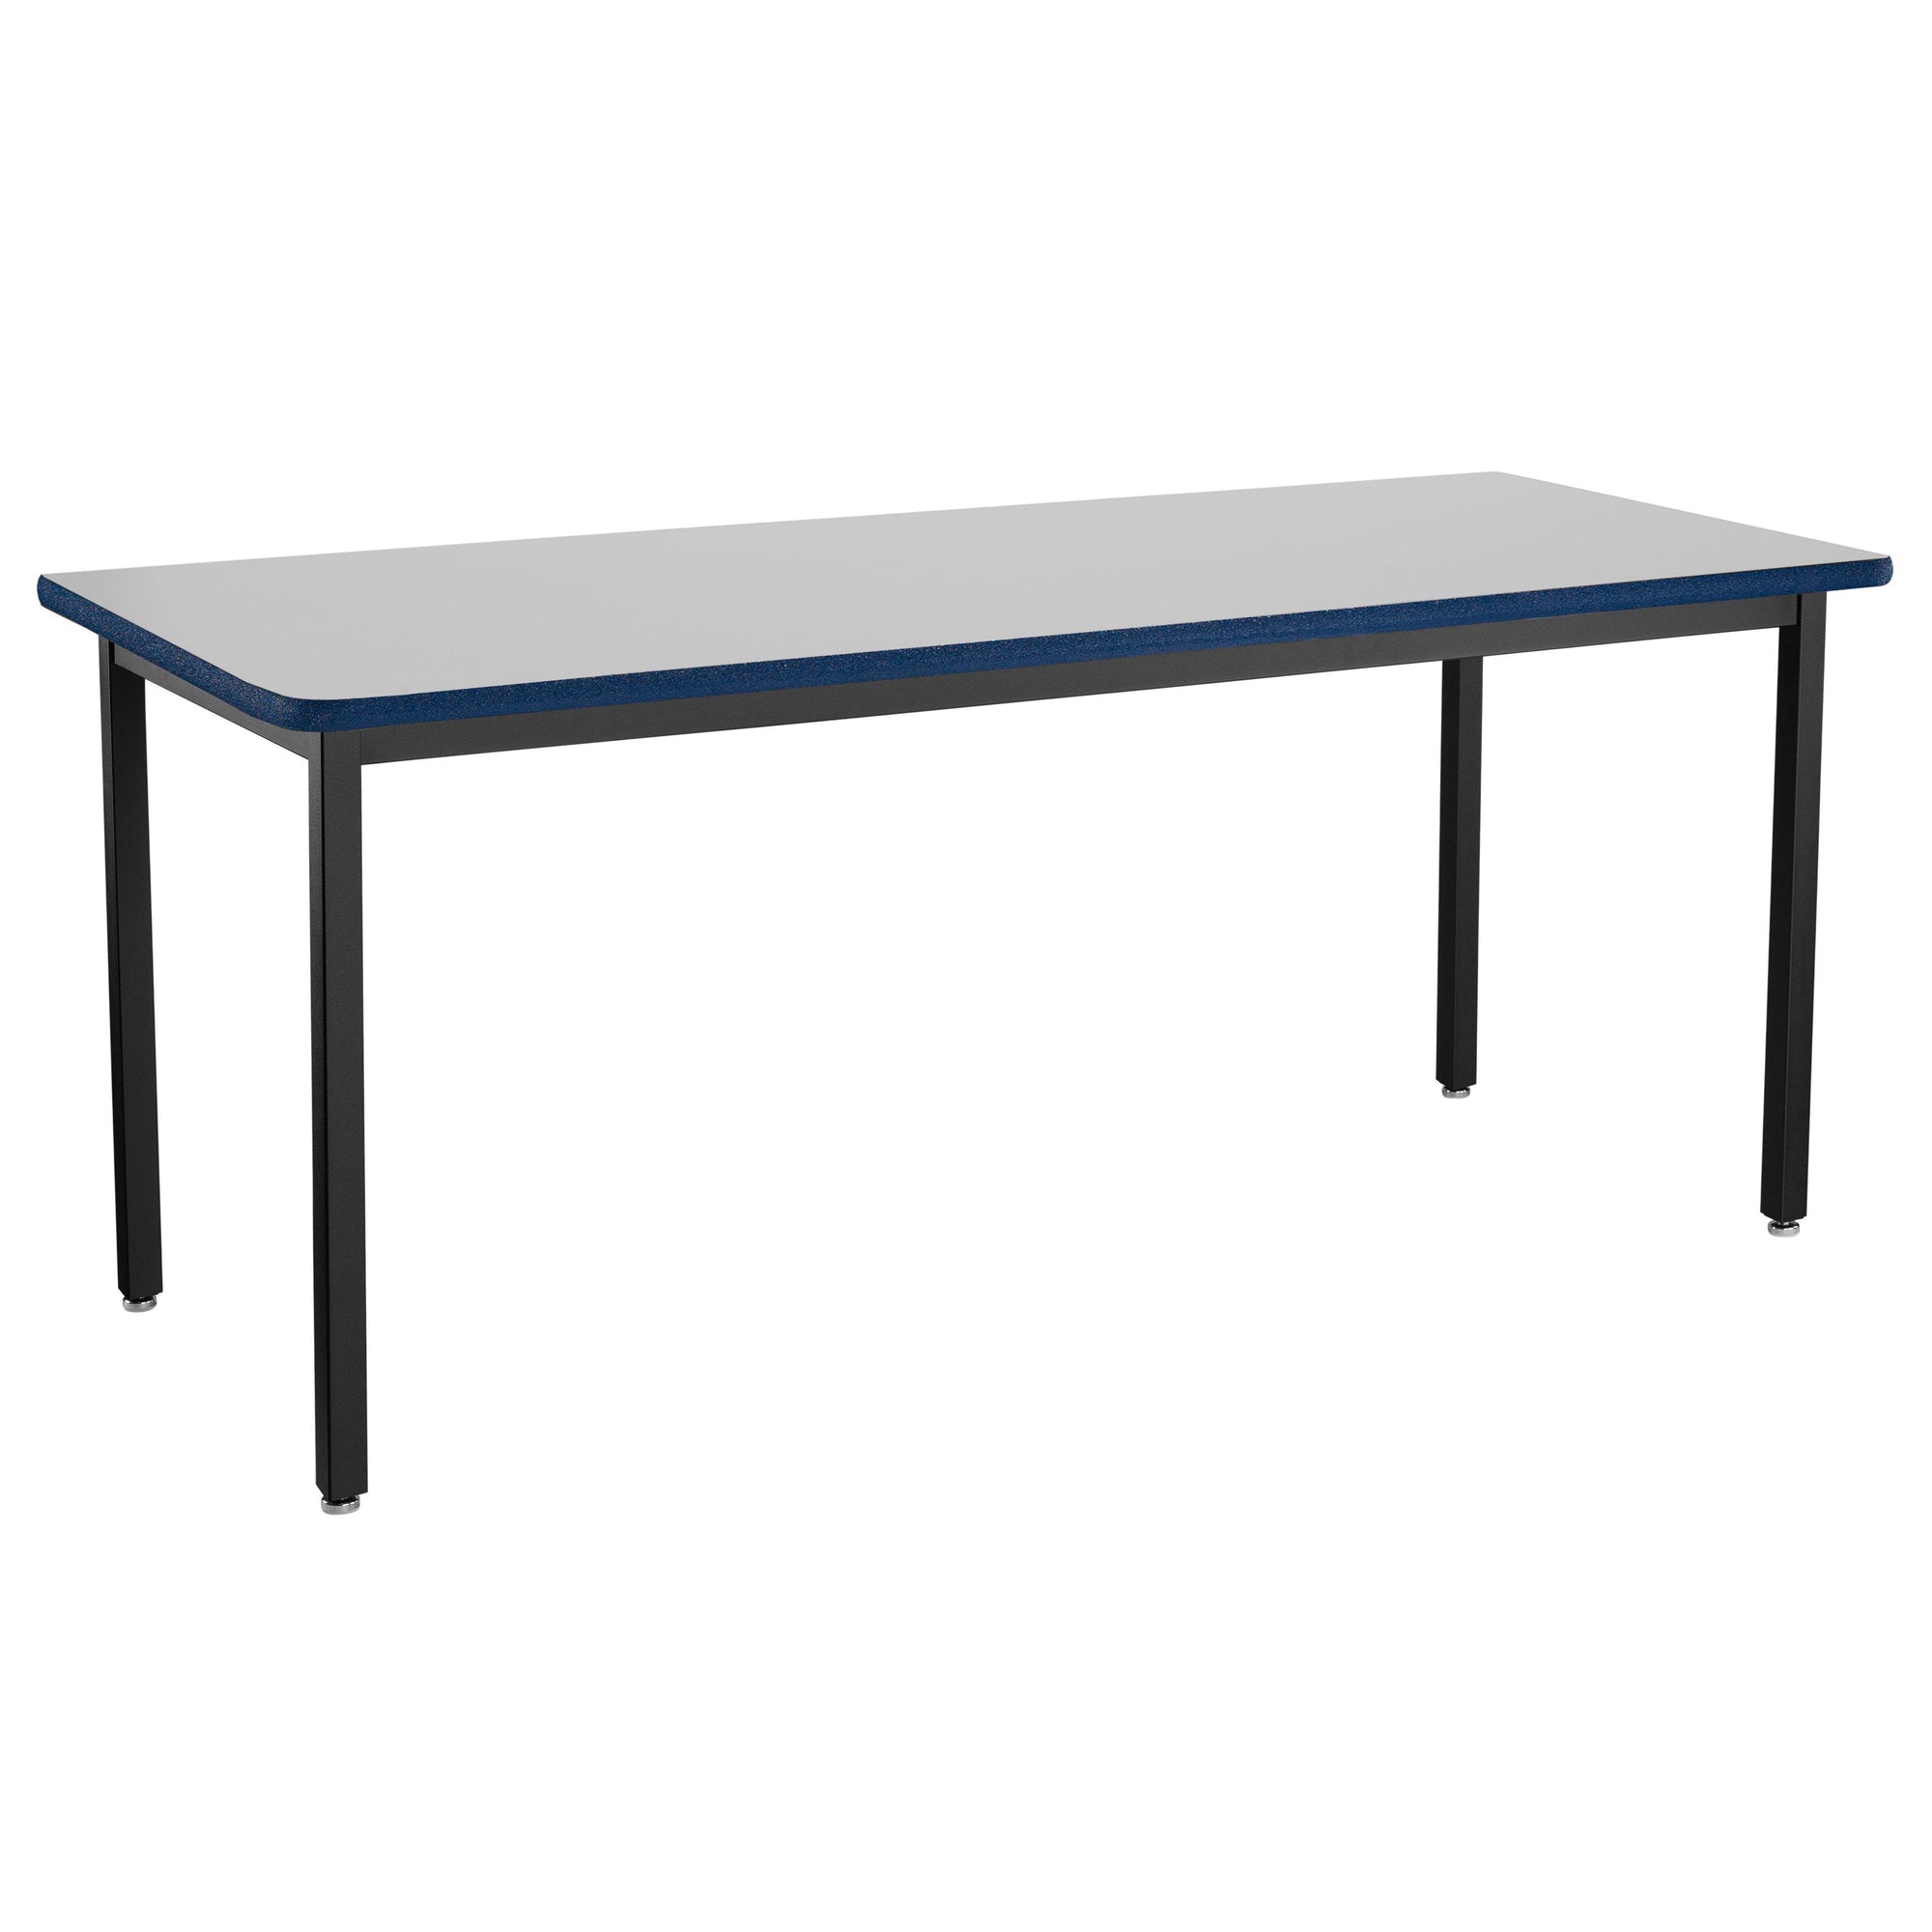 Heavy-Duty Fixed Height Utility Table, Black Frame, 24" x 84", Supreme High-Pressure Laminate Top with Black ProtectEdge